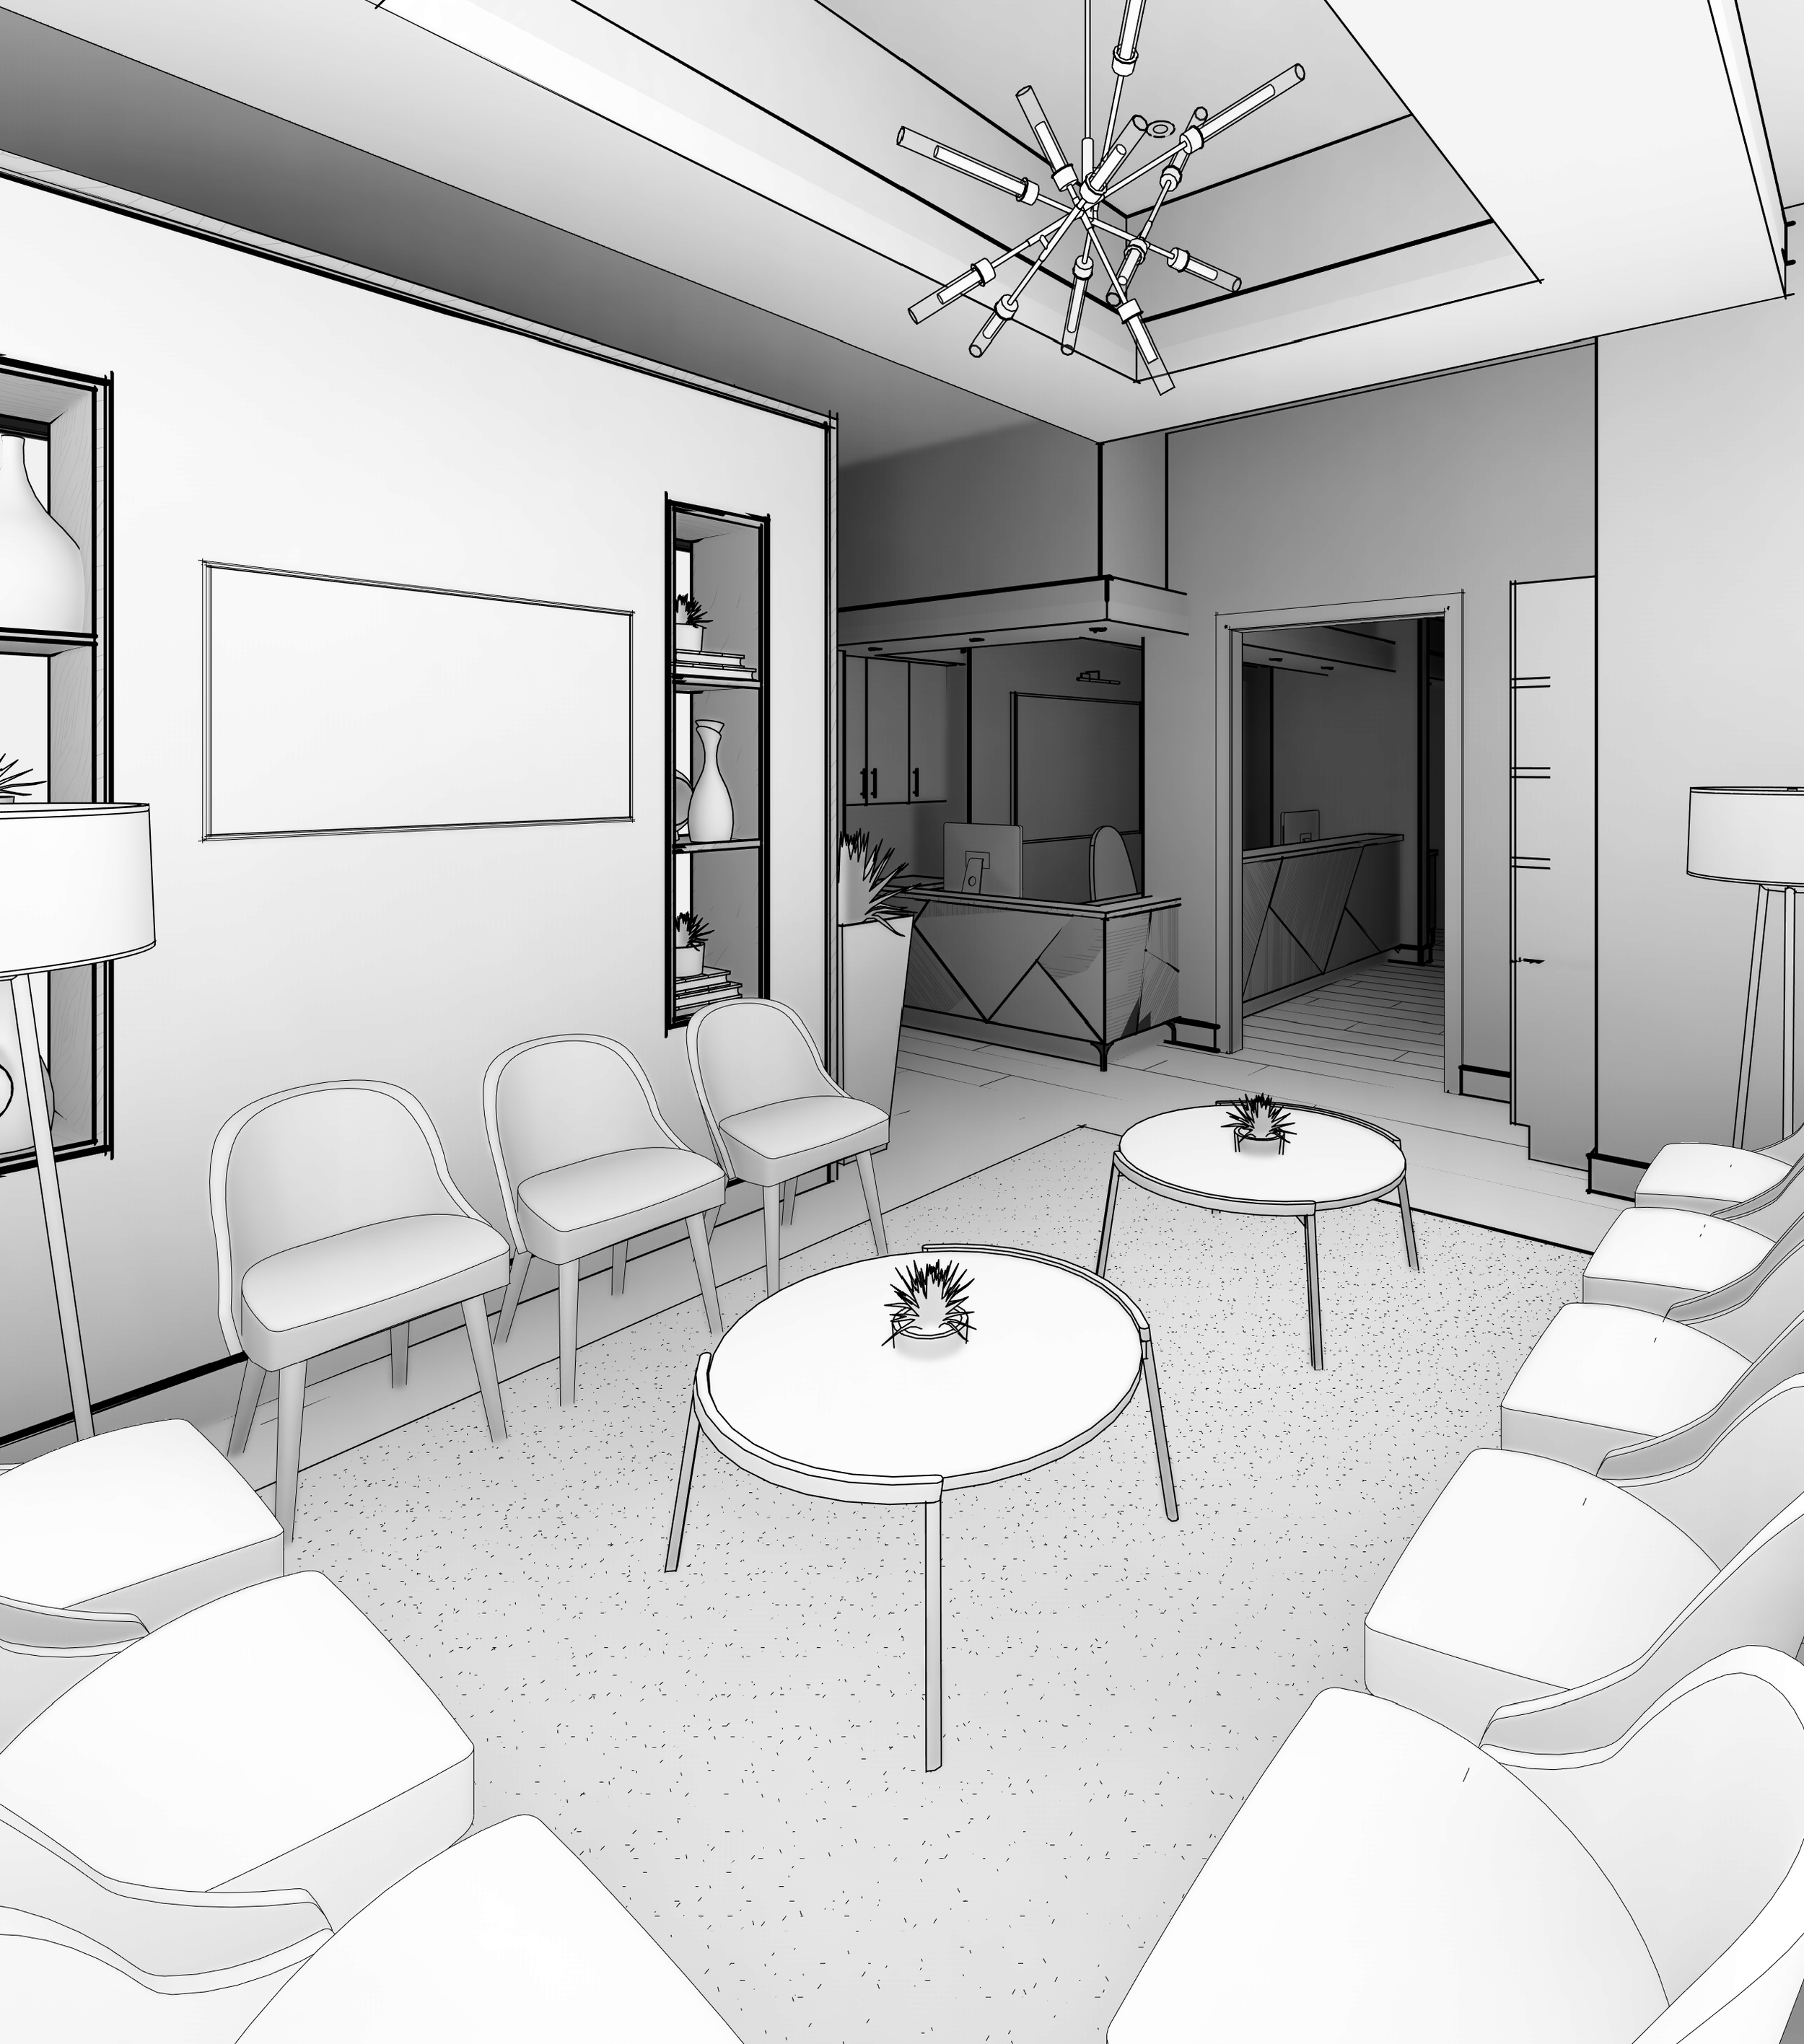 LIVE_Heydari - 2021_FAZIOGREG - 3D View - INTERIOR VIEW - RECEPTION AREA TO CHECK-IN.png